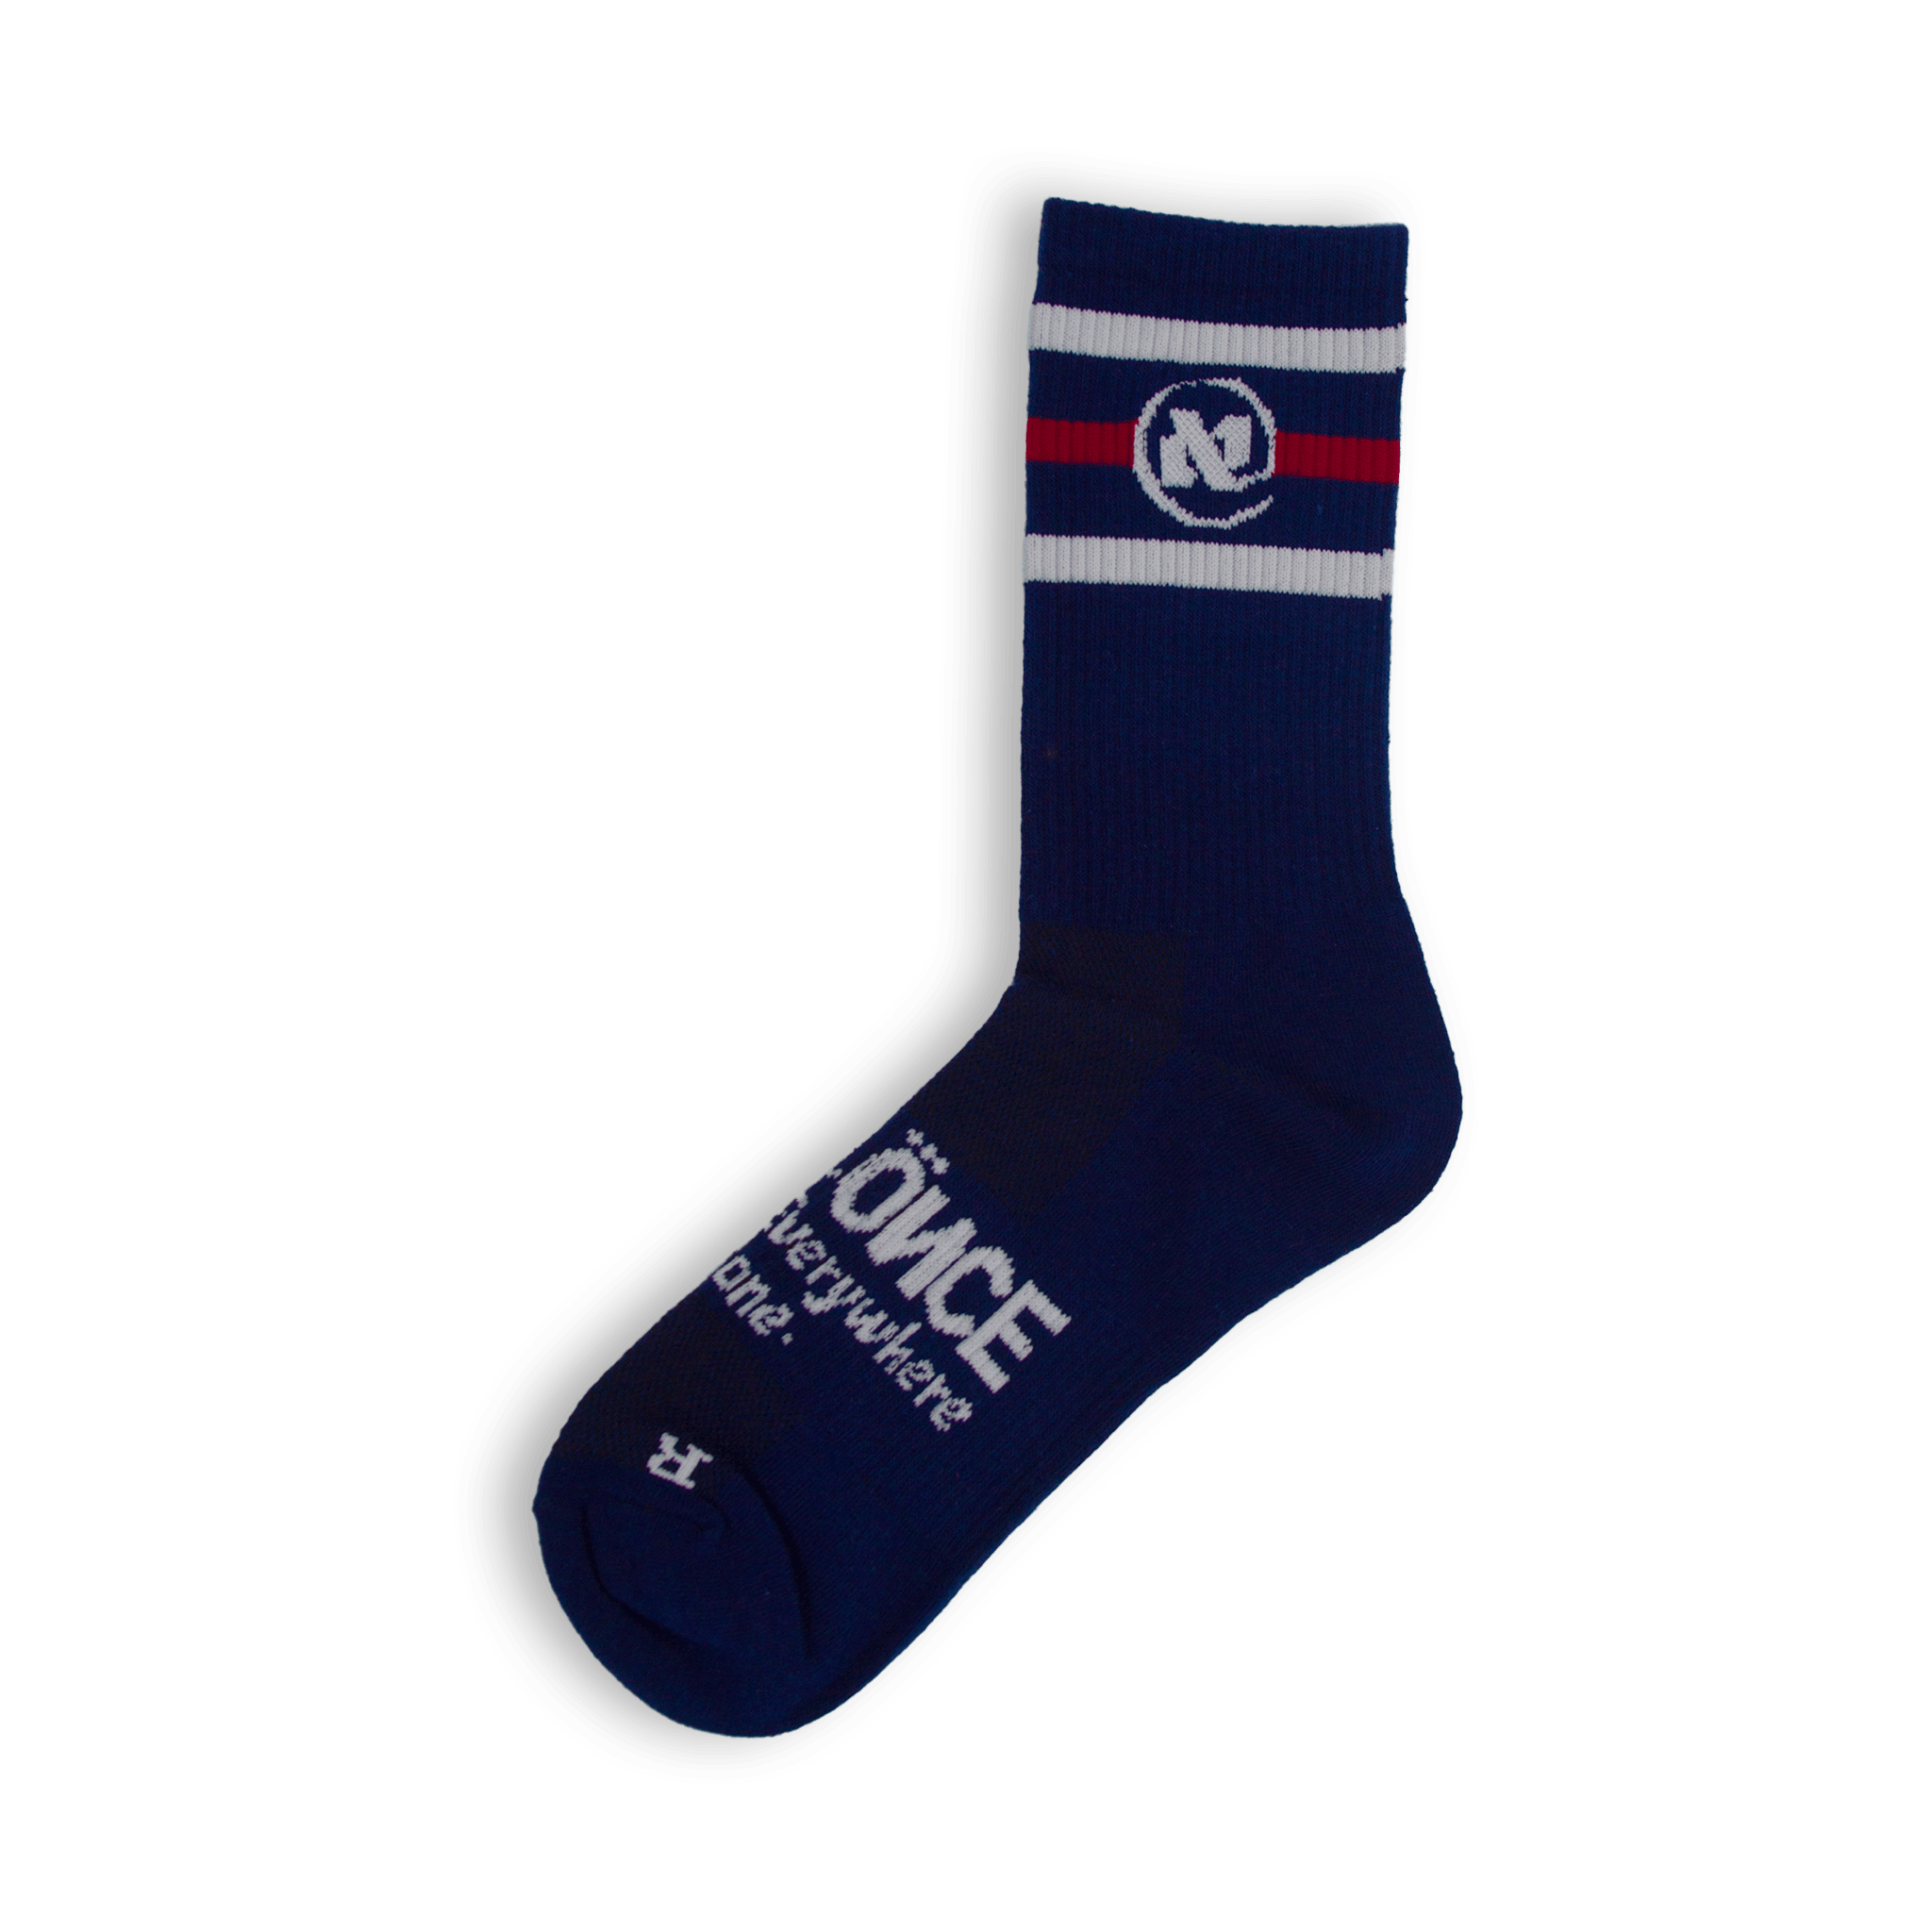 Blue and Red UNI Alef Socks - All@Once